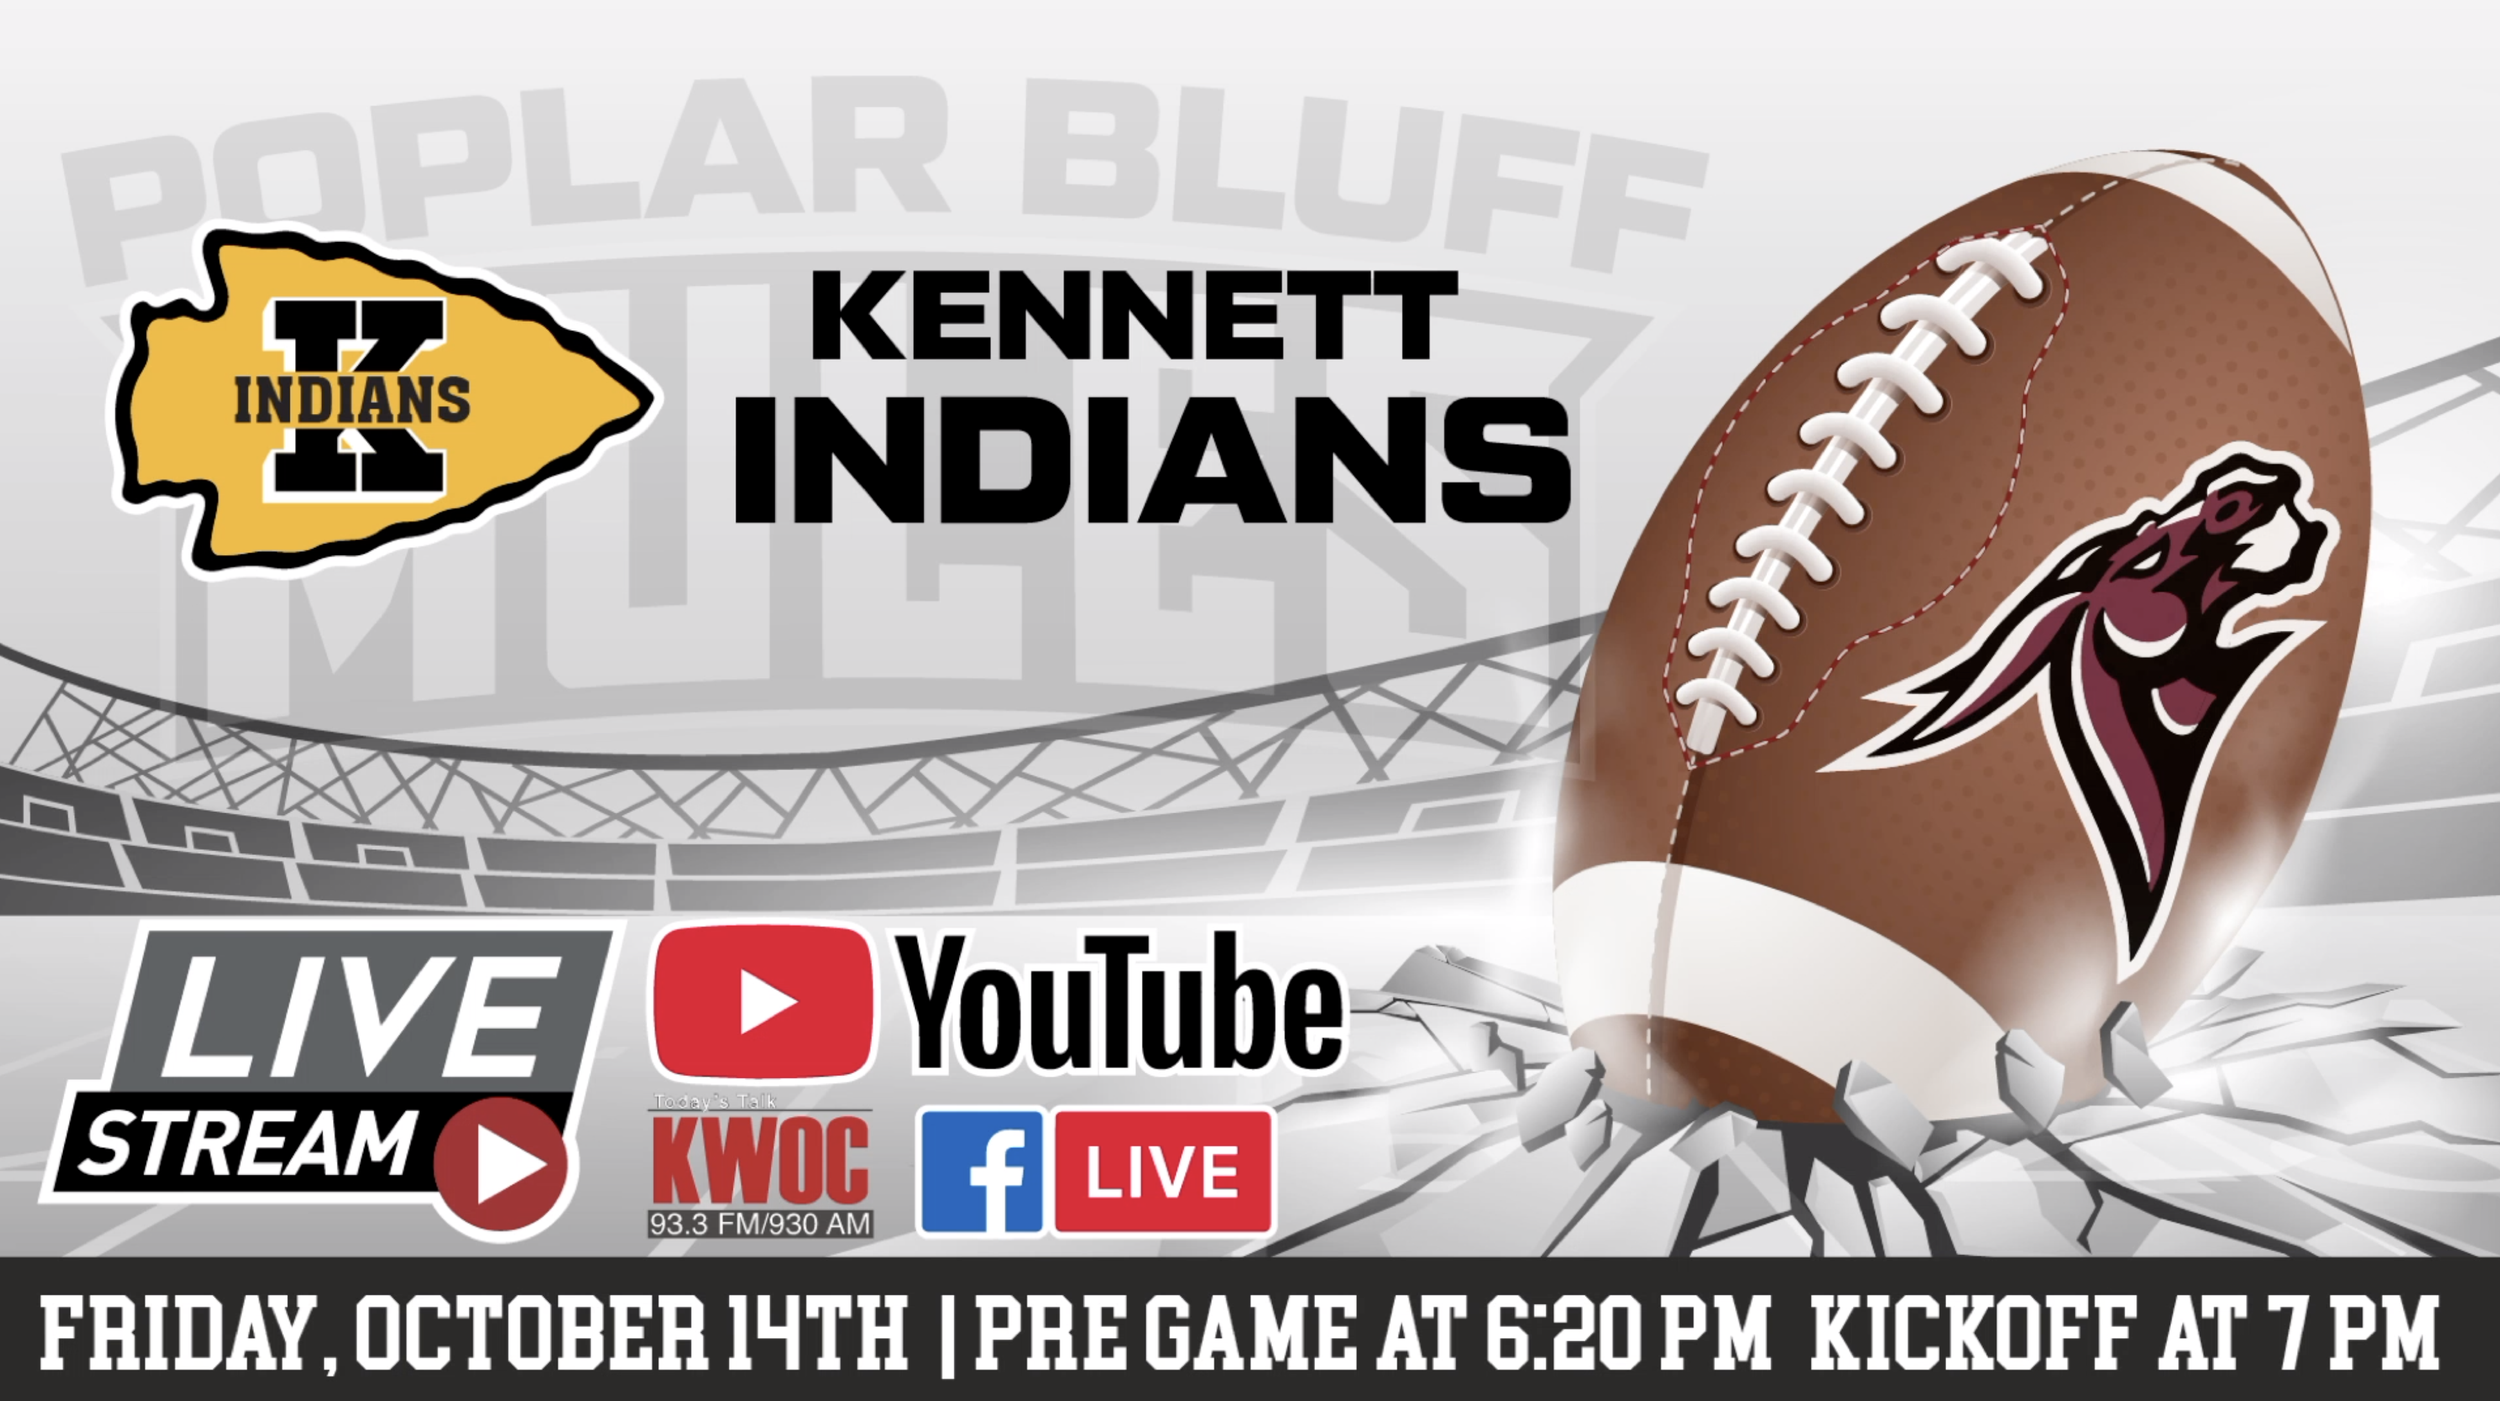 VIDEO Poplar Bluff Mules on the road tonight as they face state ranked Kennett Indians — Todays Talk